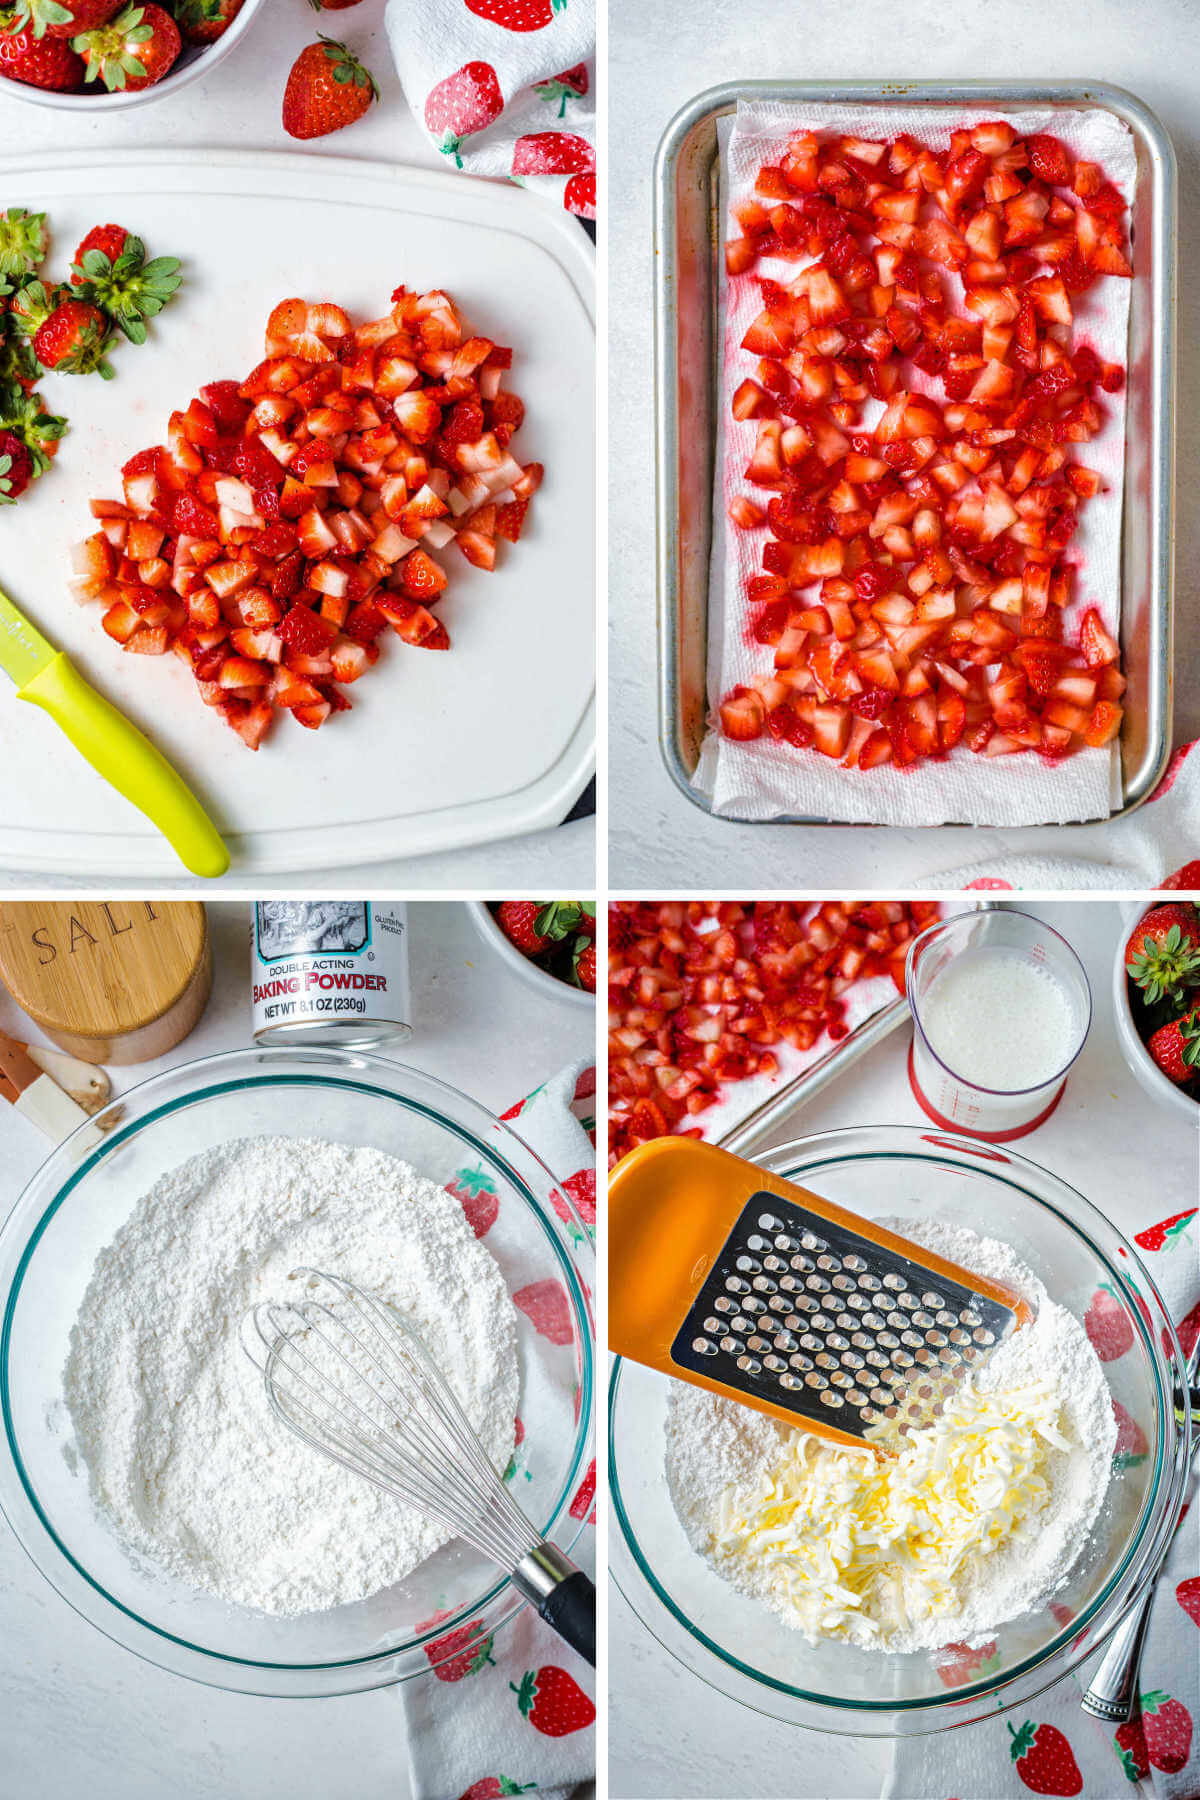 diced strawberries drying on a paper towel, mixing dry ingredients for strawberry biscuits.